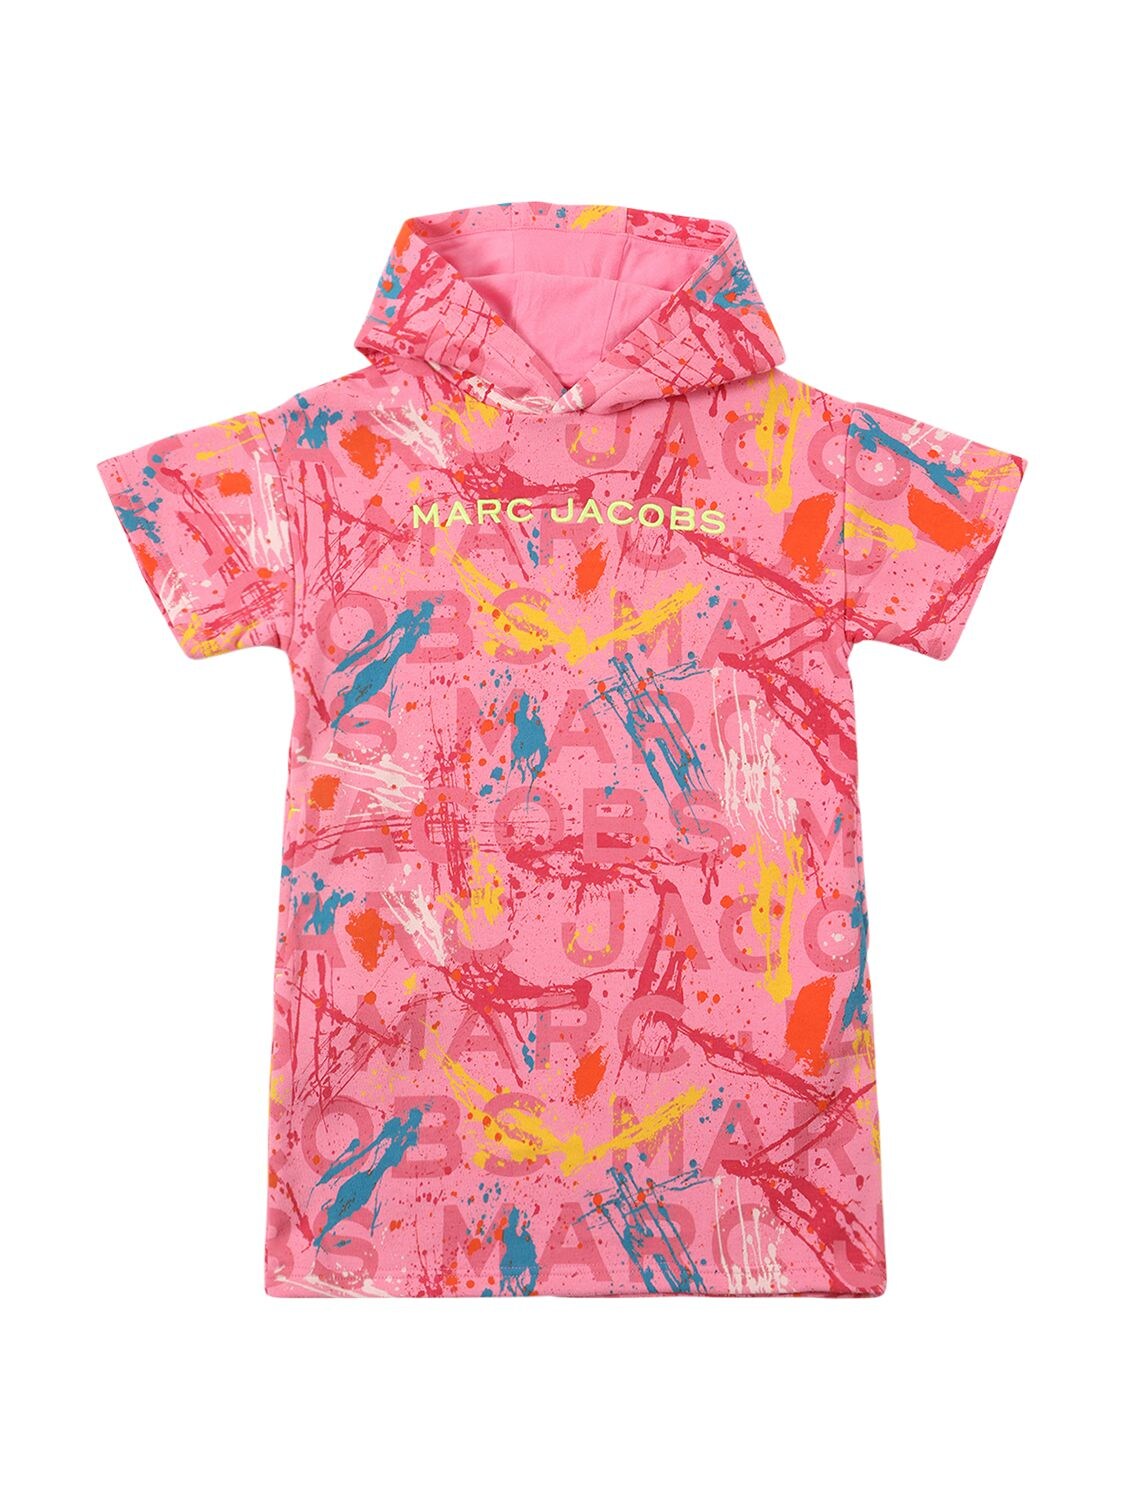 Marc Jacobs Kids' All Over Print Cotton Jersey Dress In Fuchsia